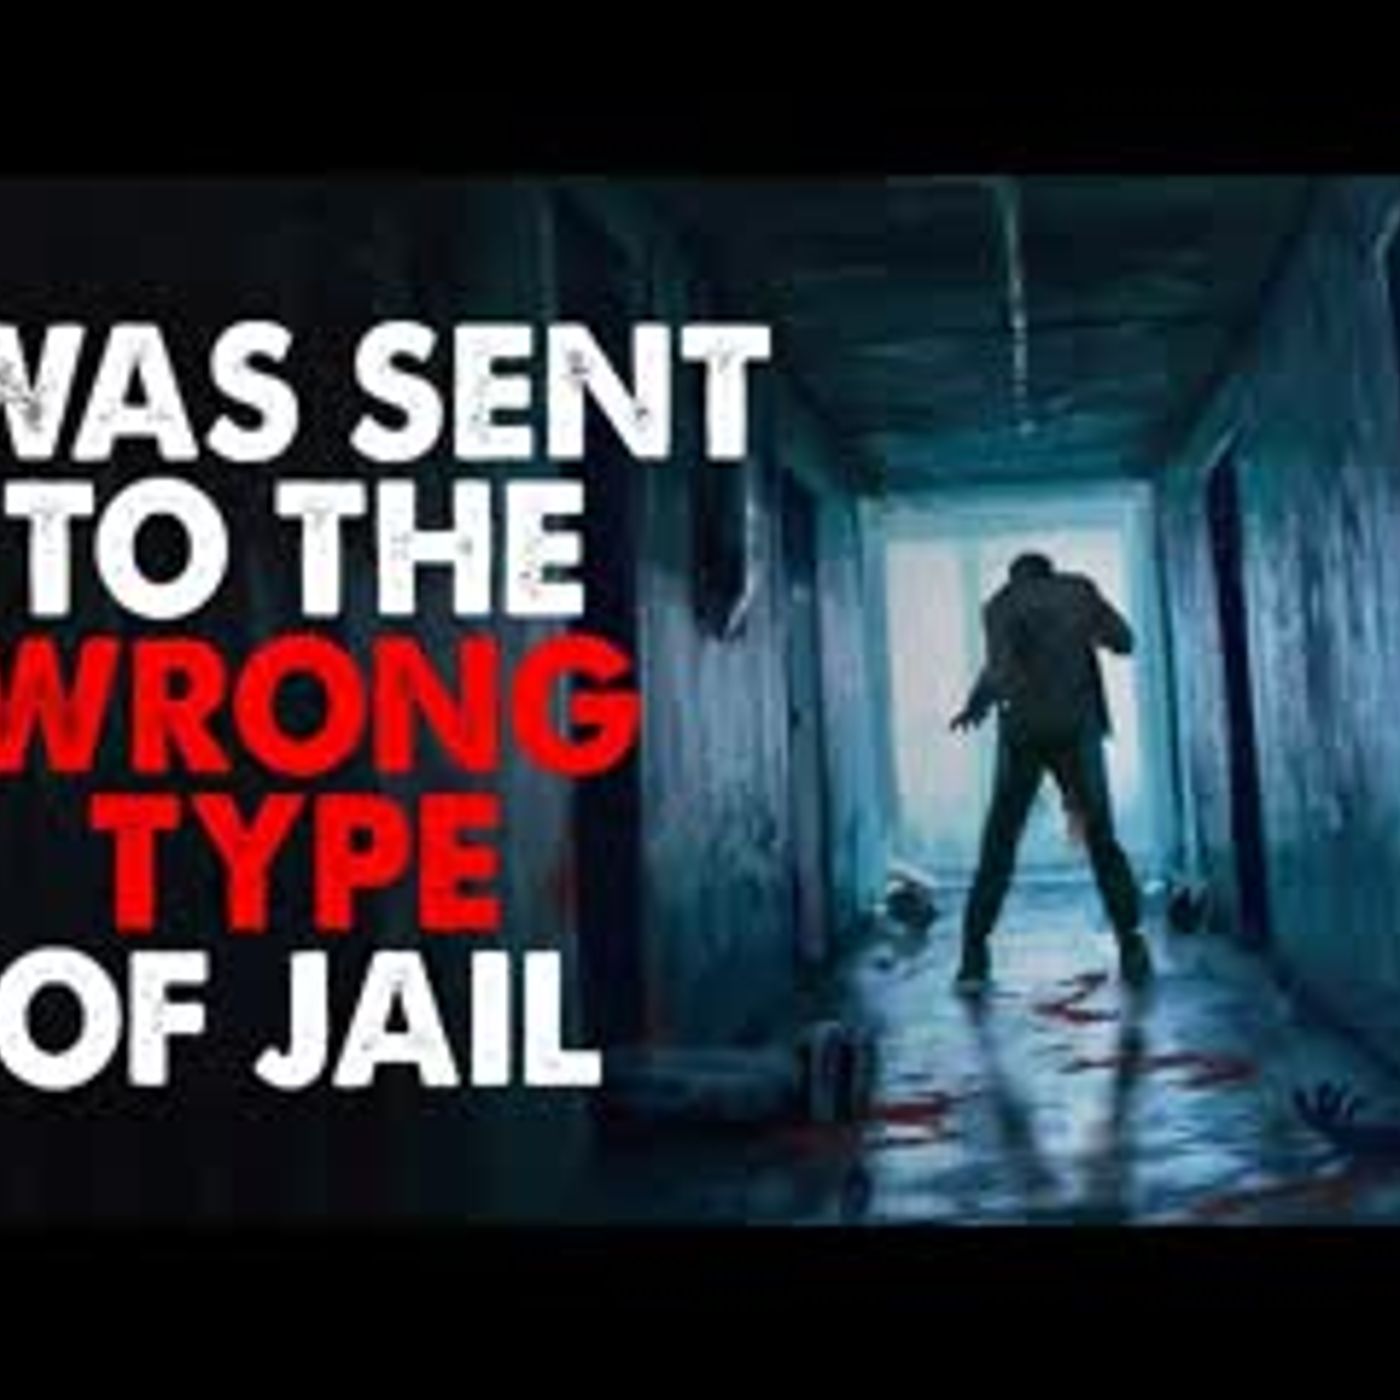 "I was sent to the wrong type of jail" Creepypasta